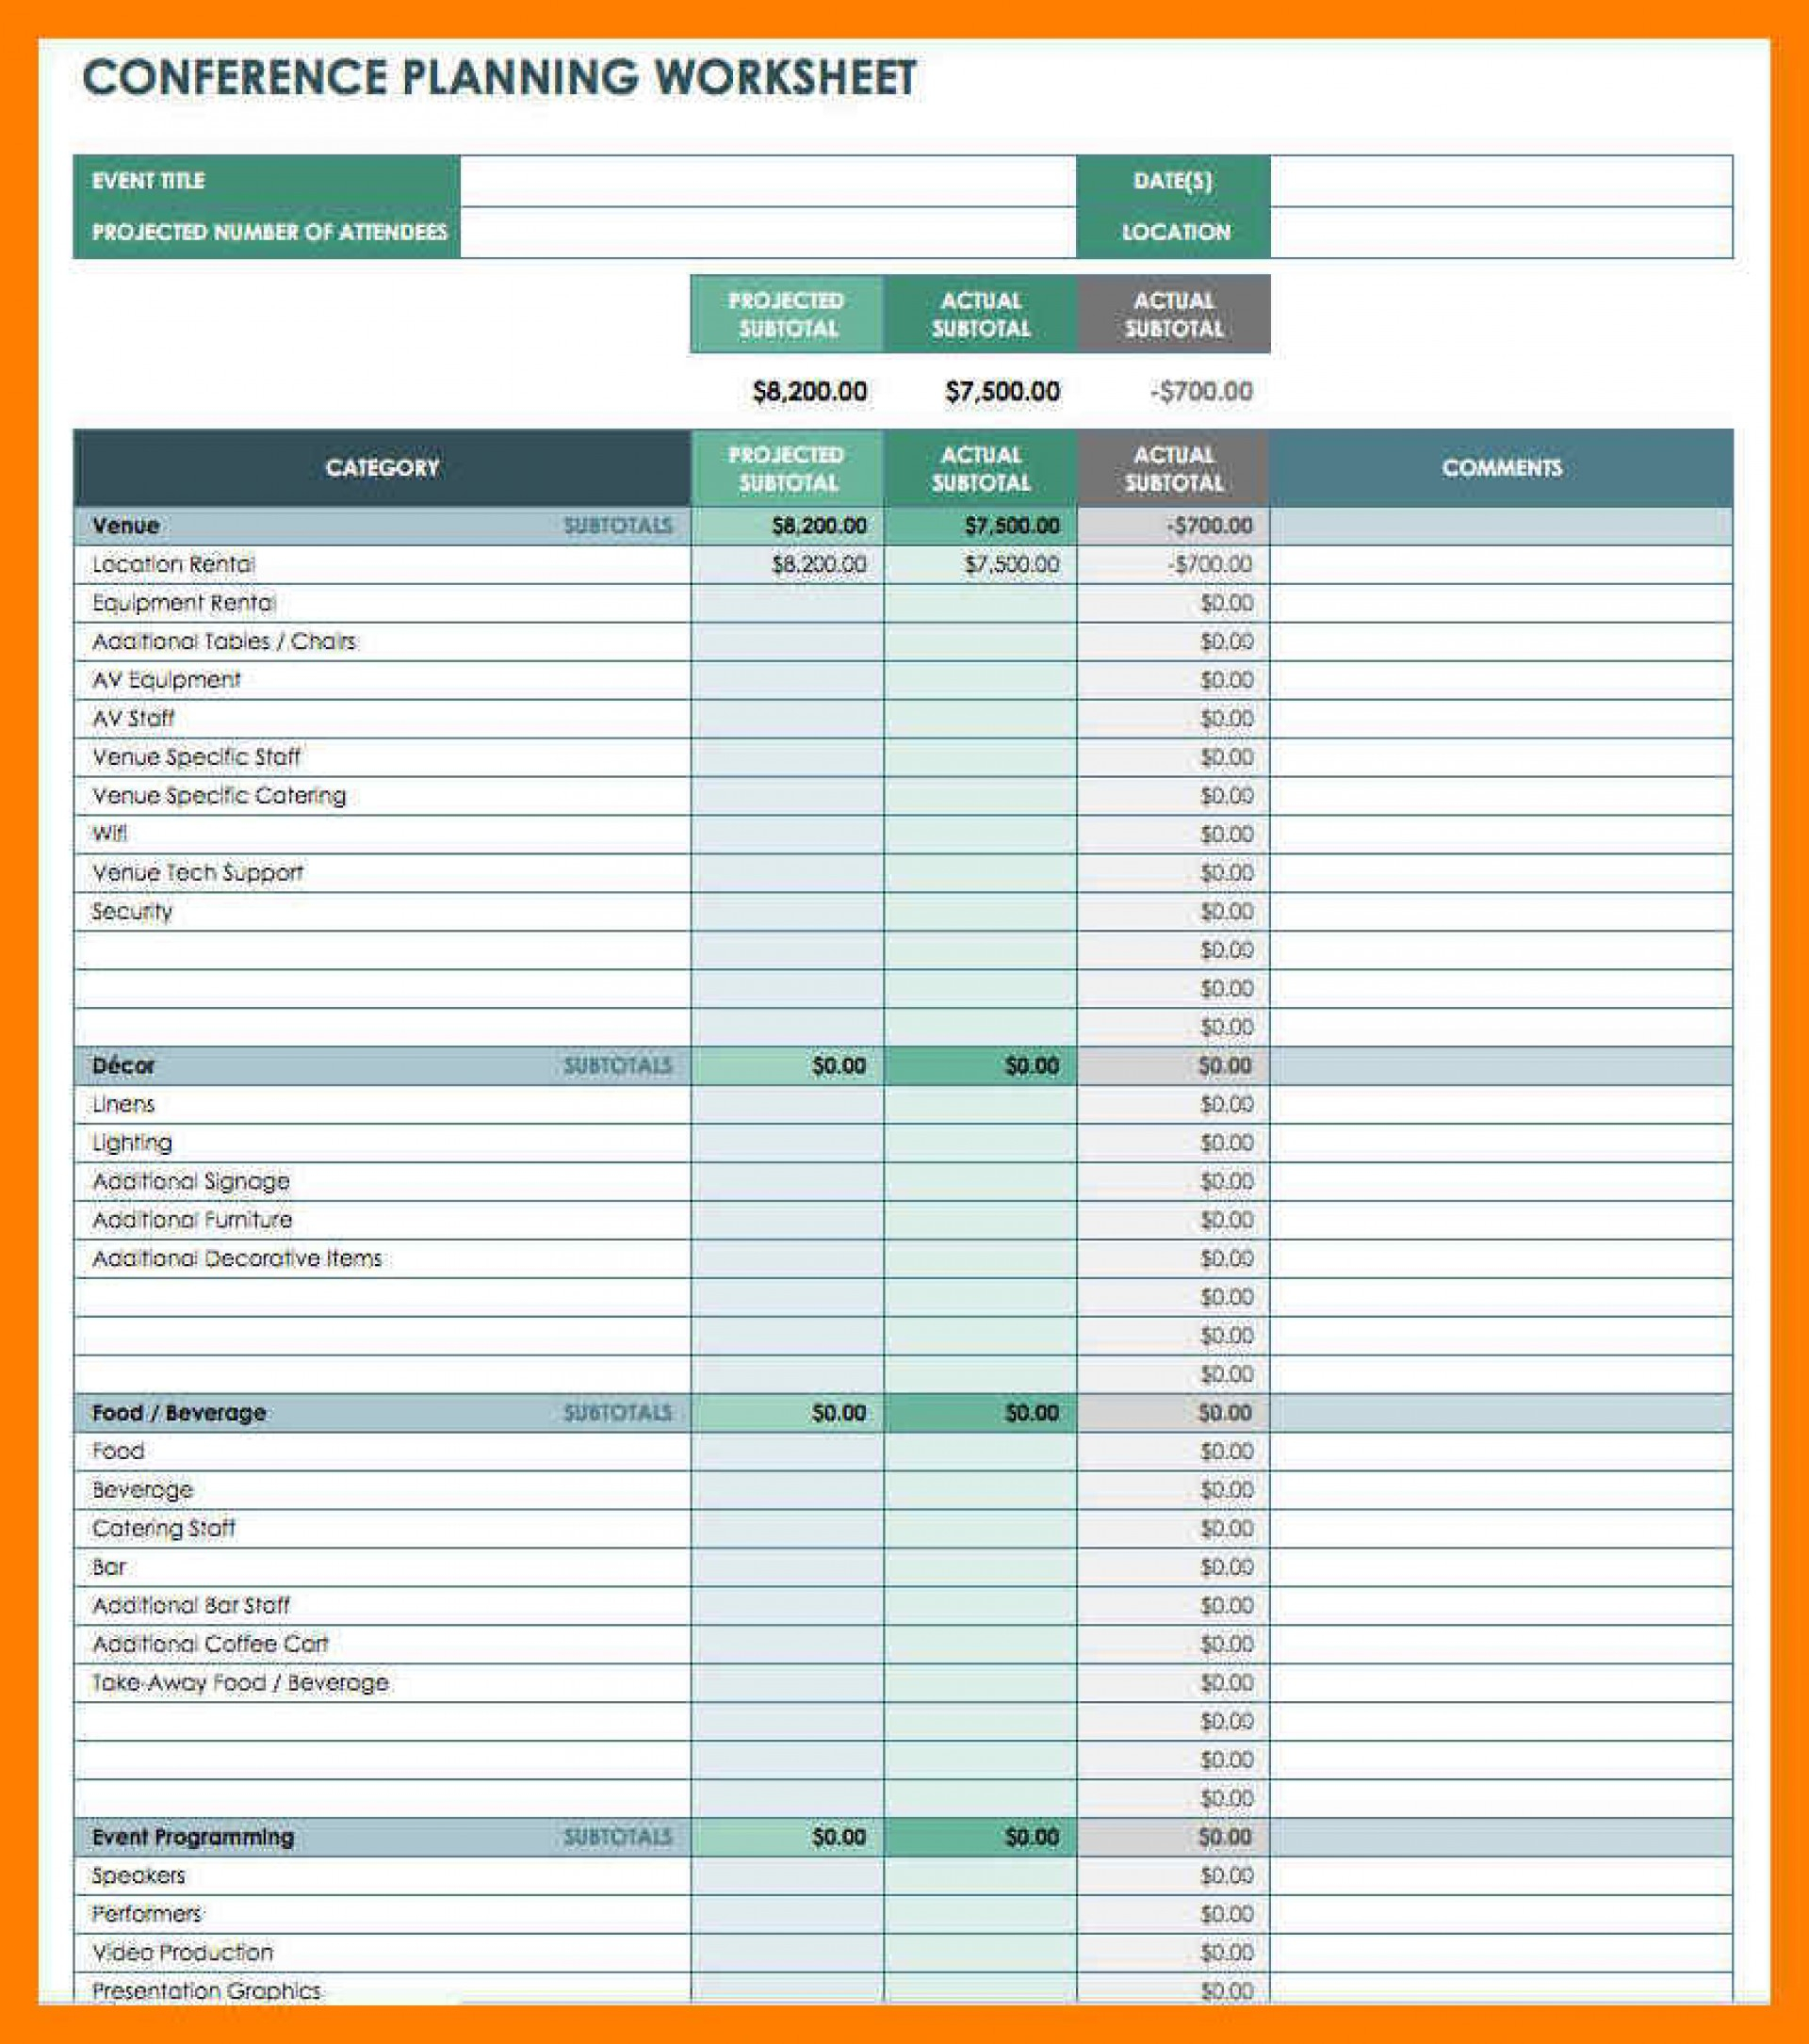 005 Event Plan Template Excel Ic Conference Planning with regard to Conference Planning Template Excel